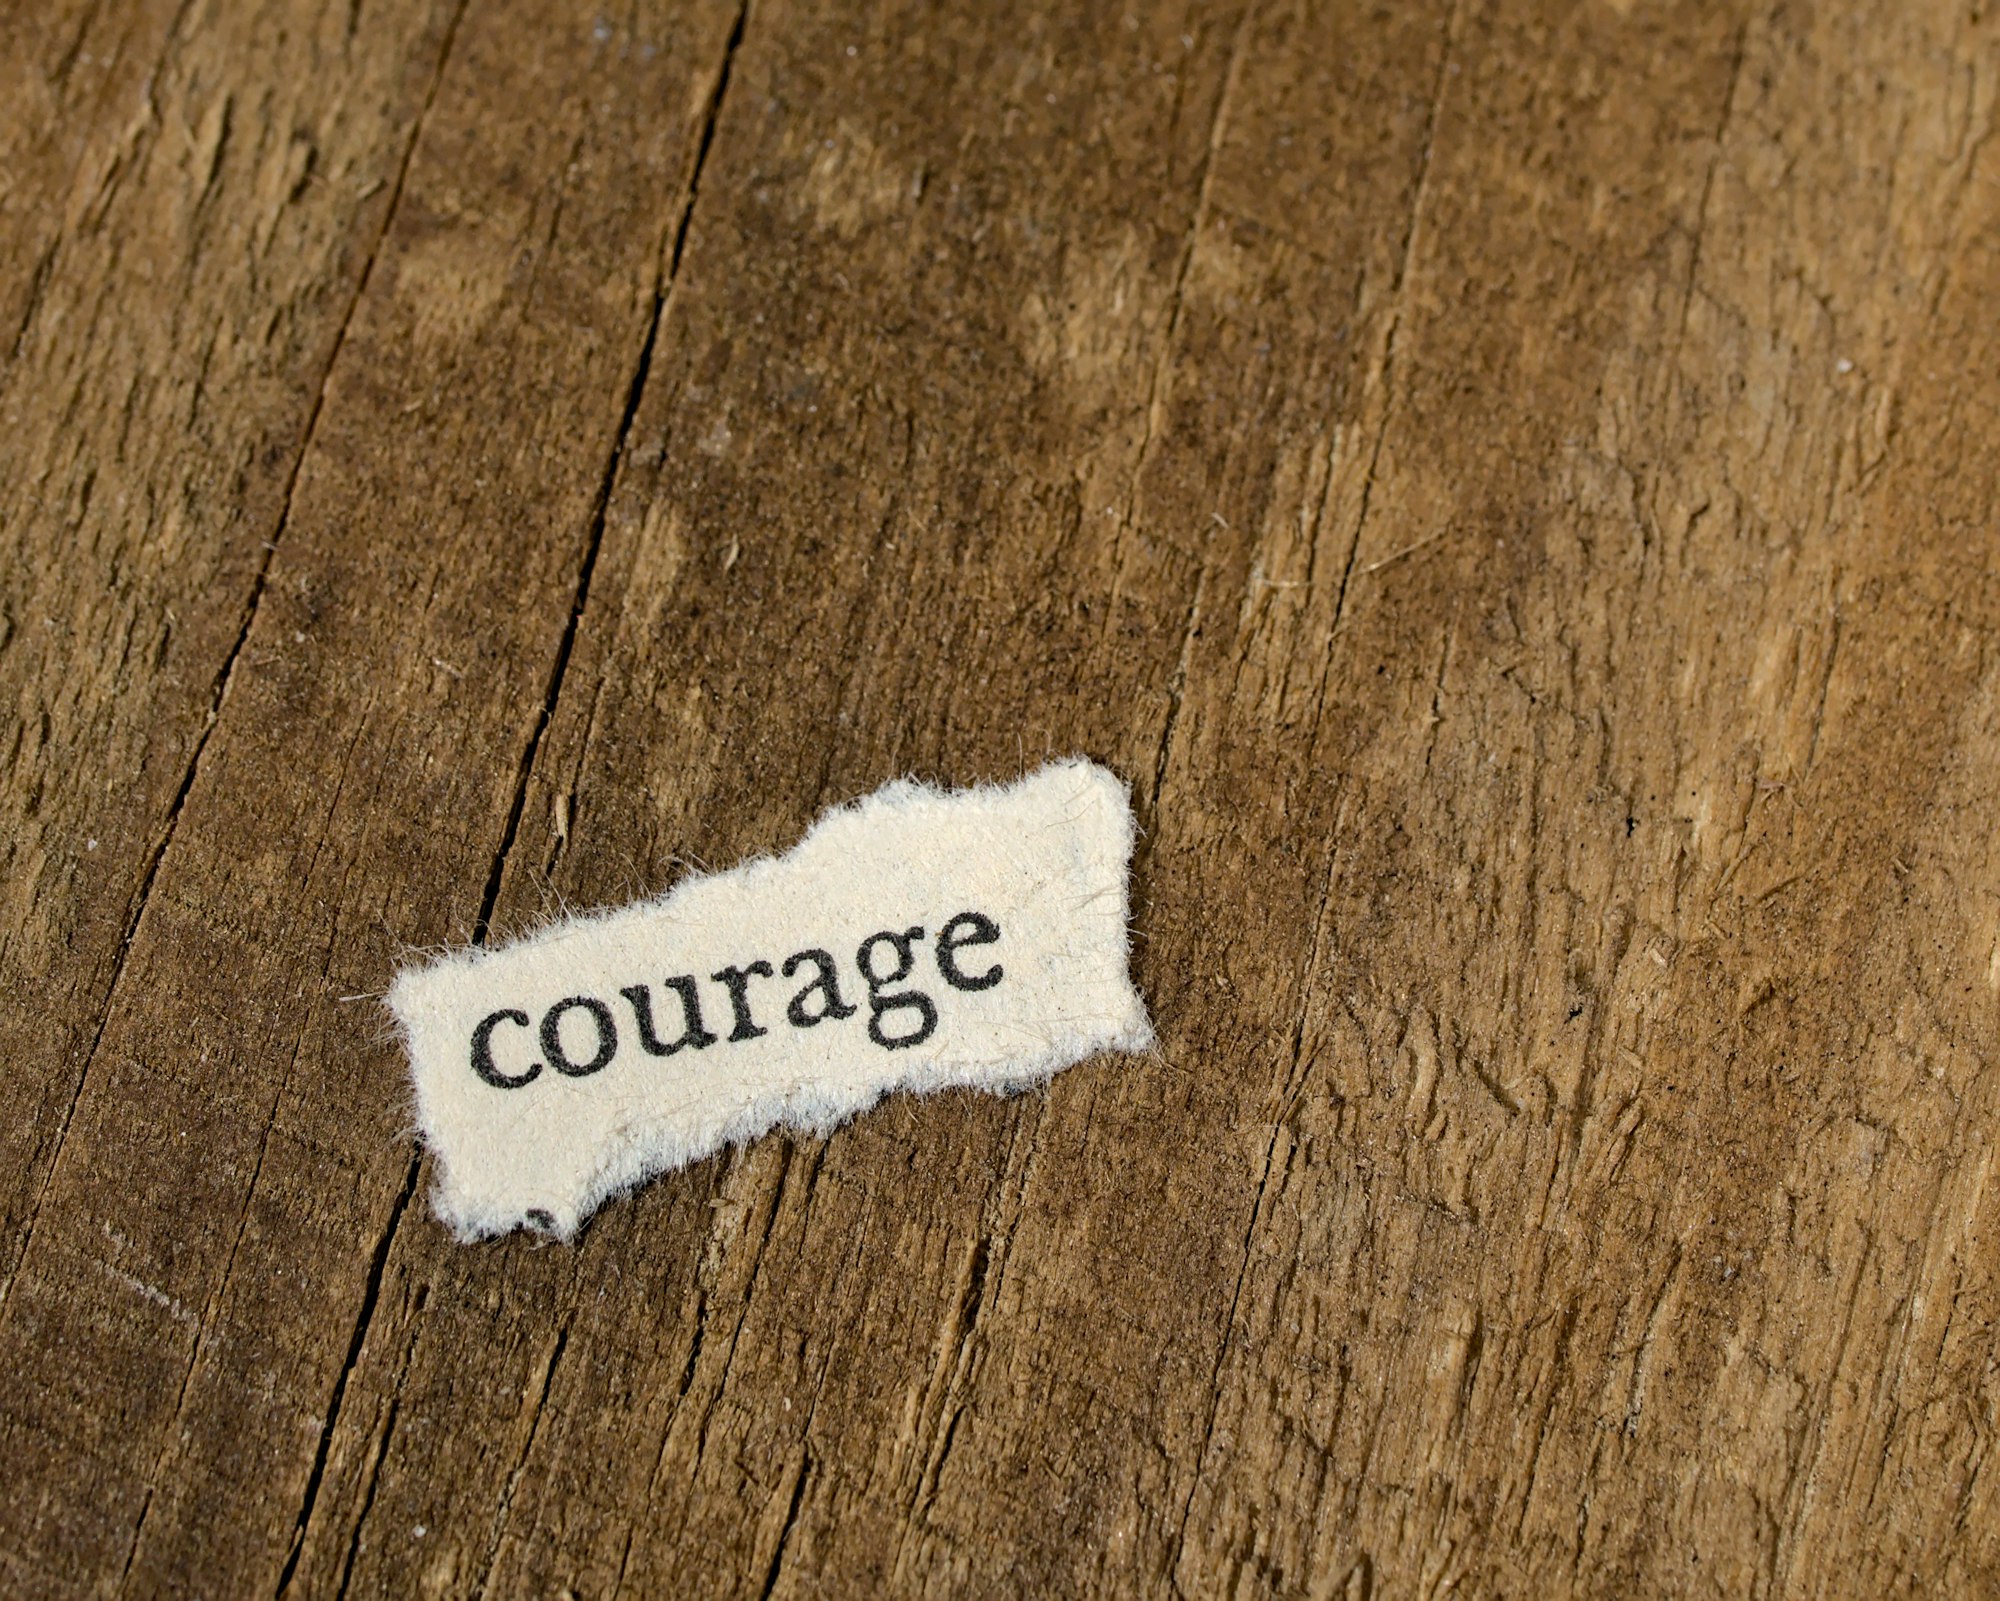 On courage